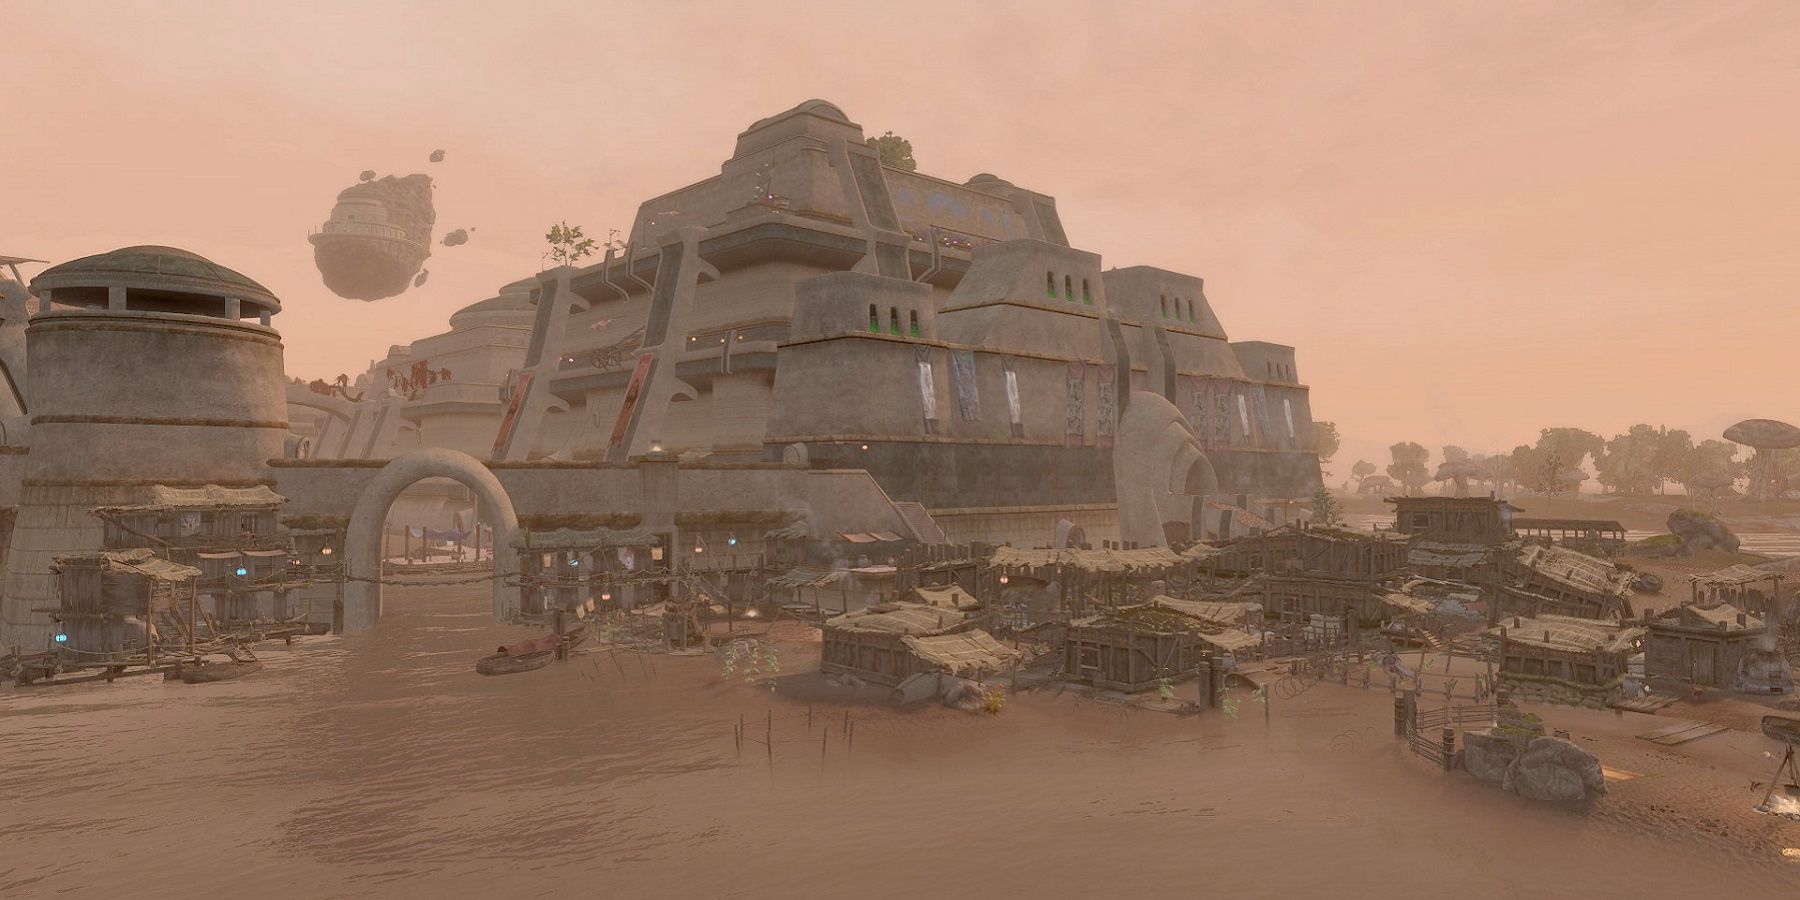 Image from the Morrowind fan remake Skywind showing the city of Vivec.